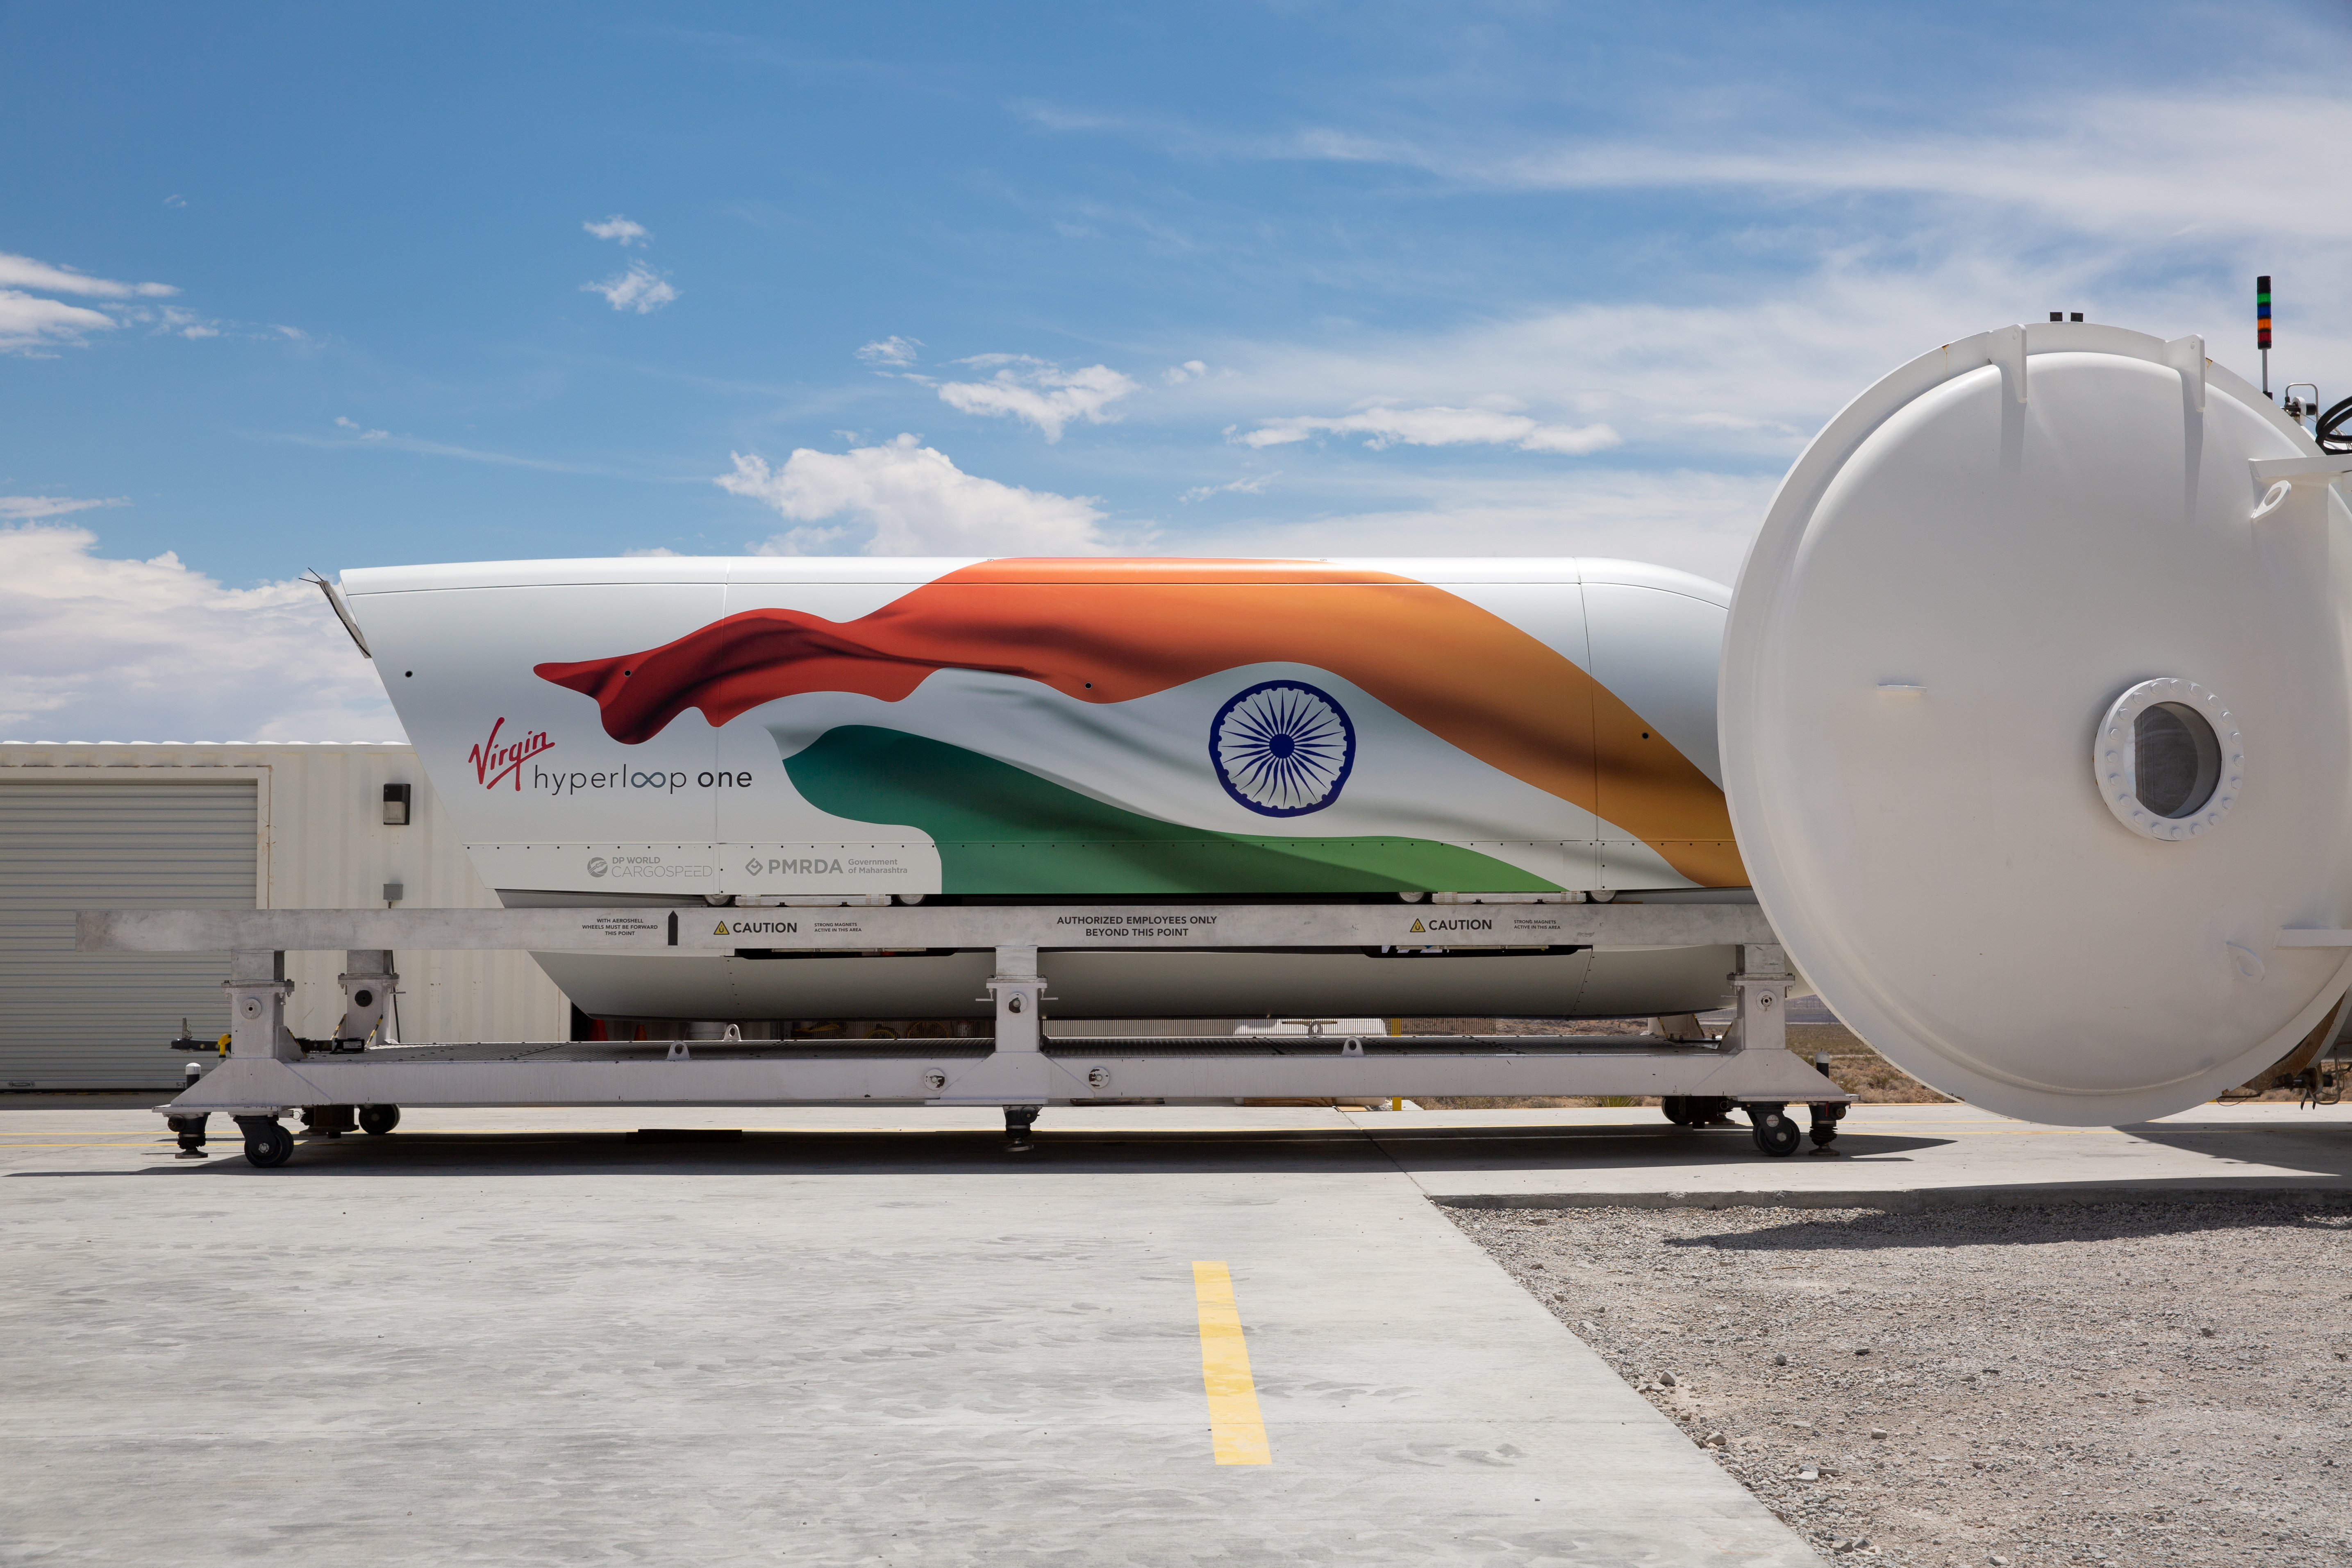 India has labeled hyperloop a public infrastructure project — here’s why that matters